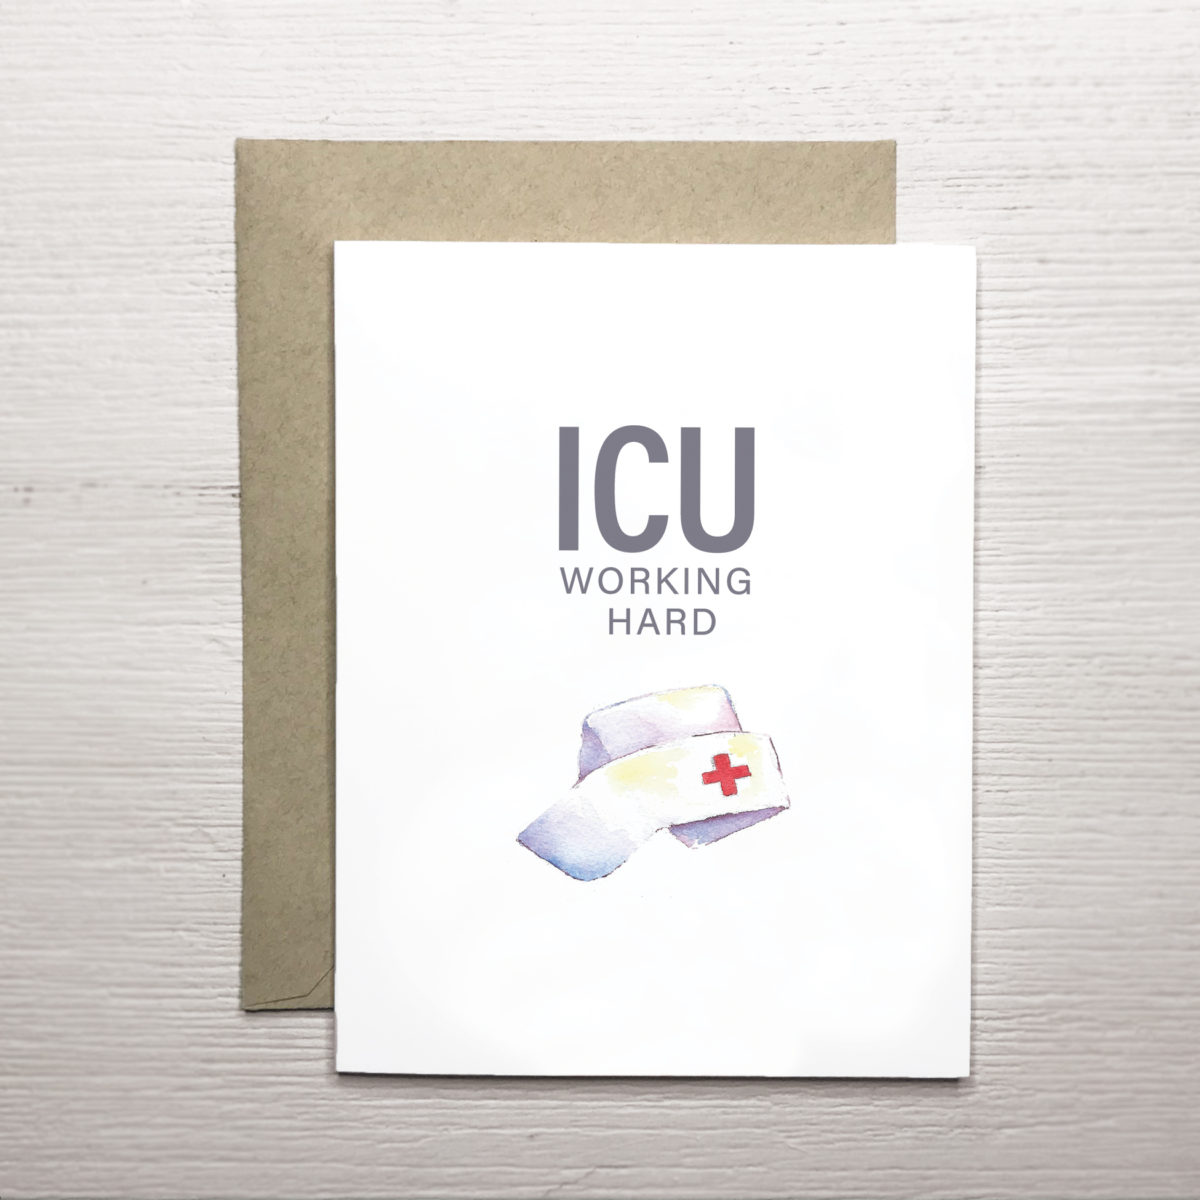 A2 greeting card with ICU tagline and nurse hat